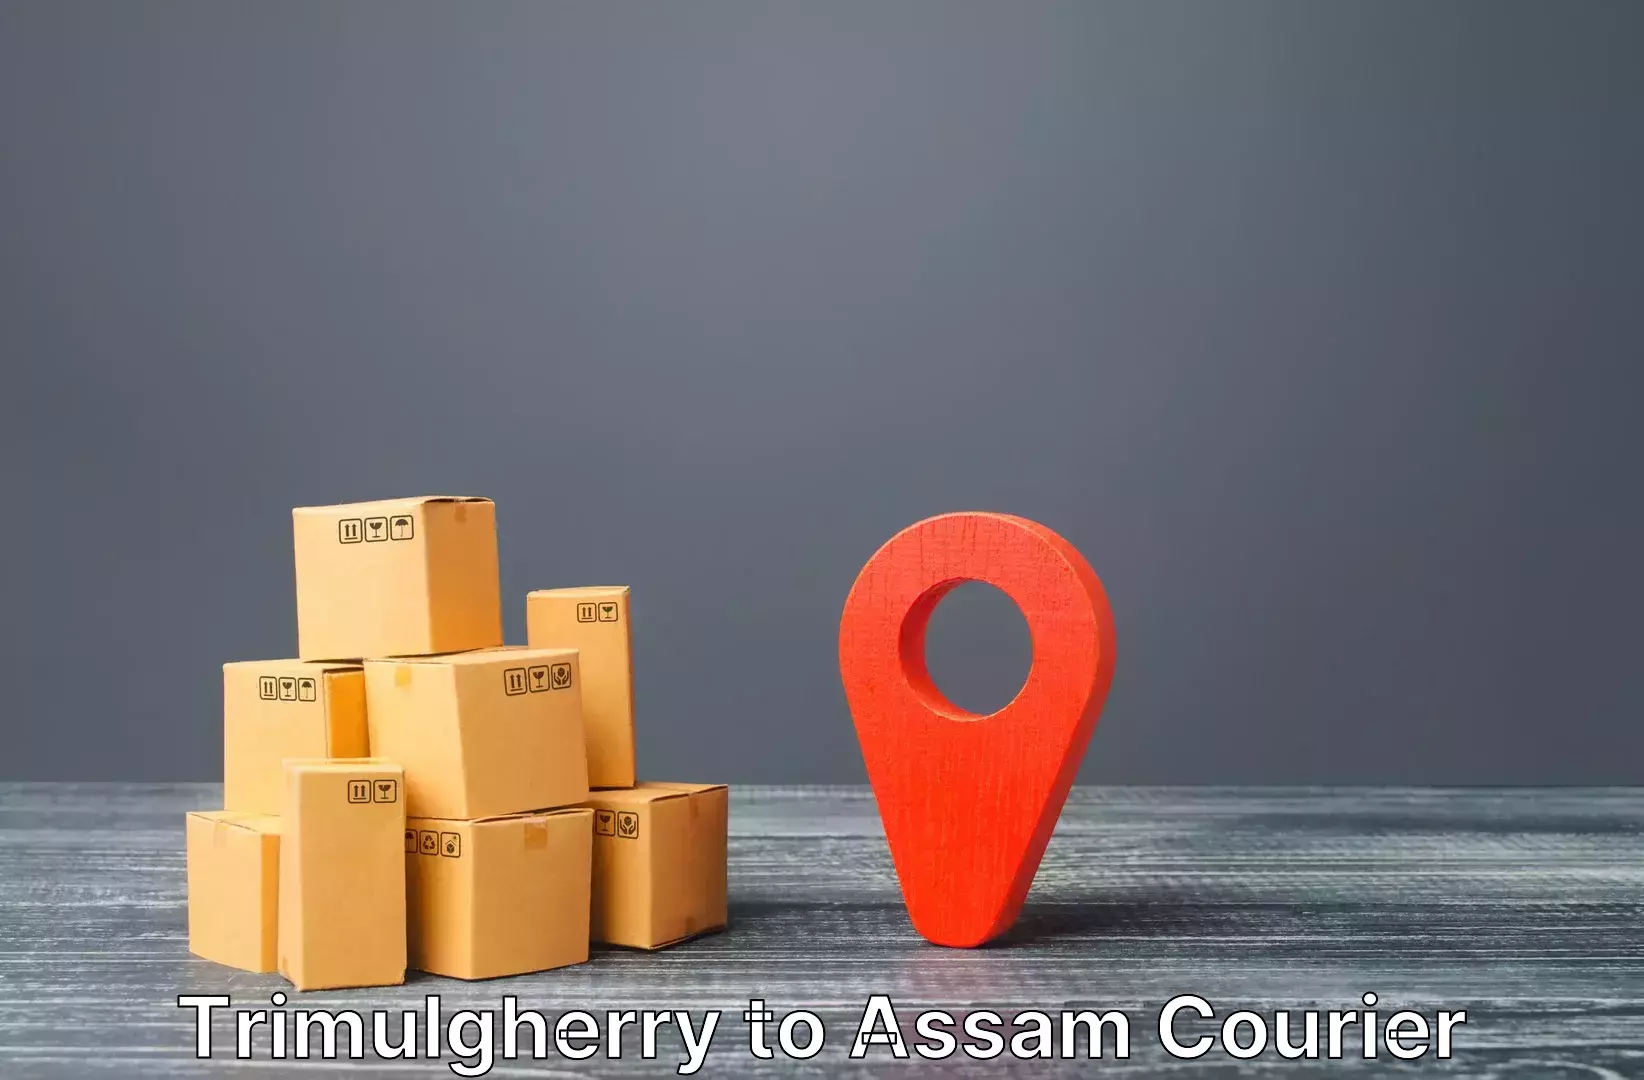 Luggage delivery app Trimulgherry to Assam